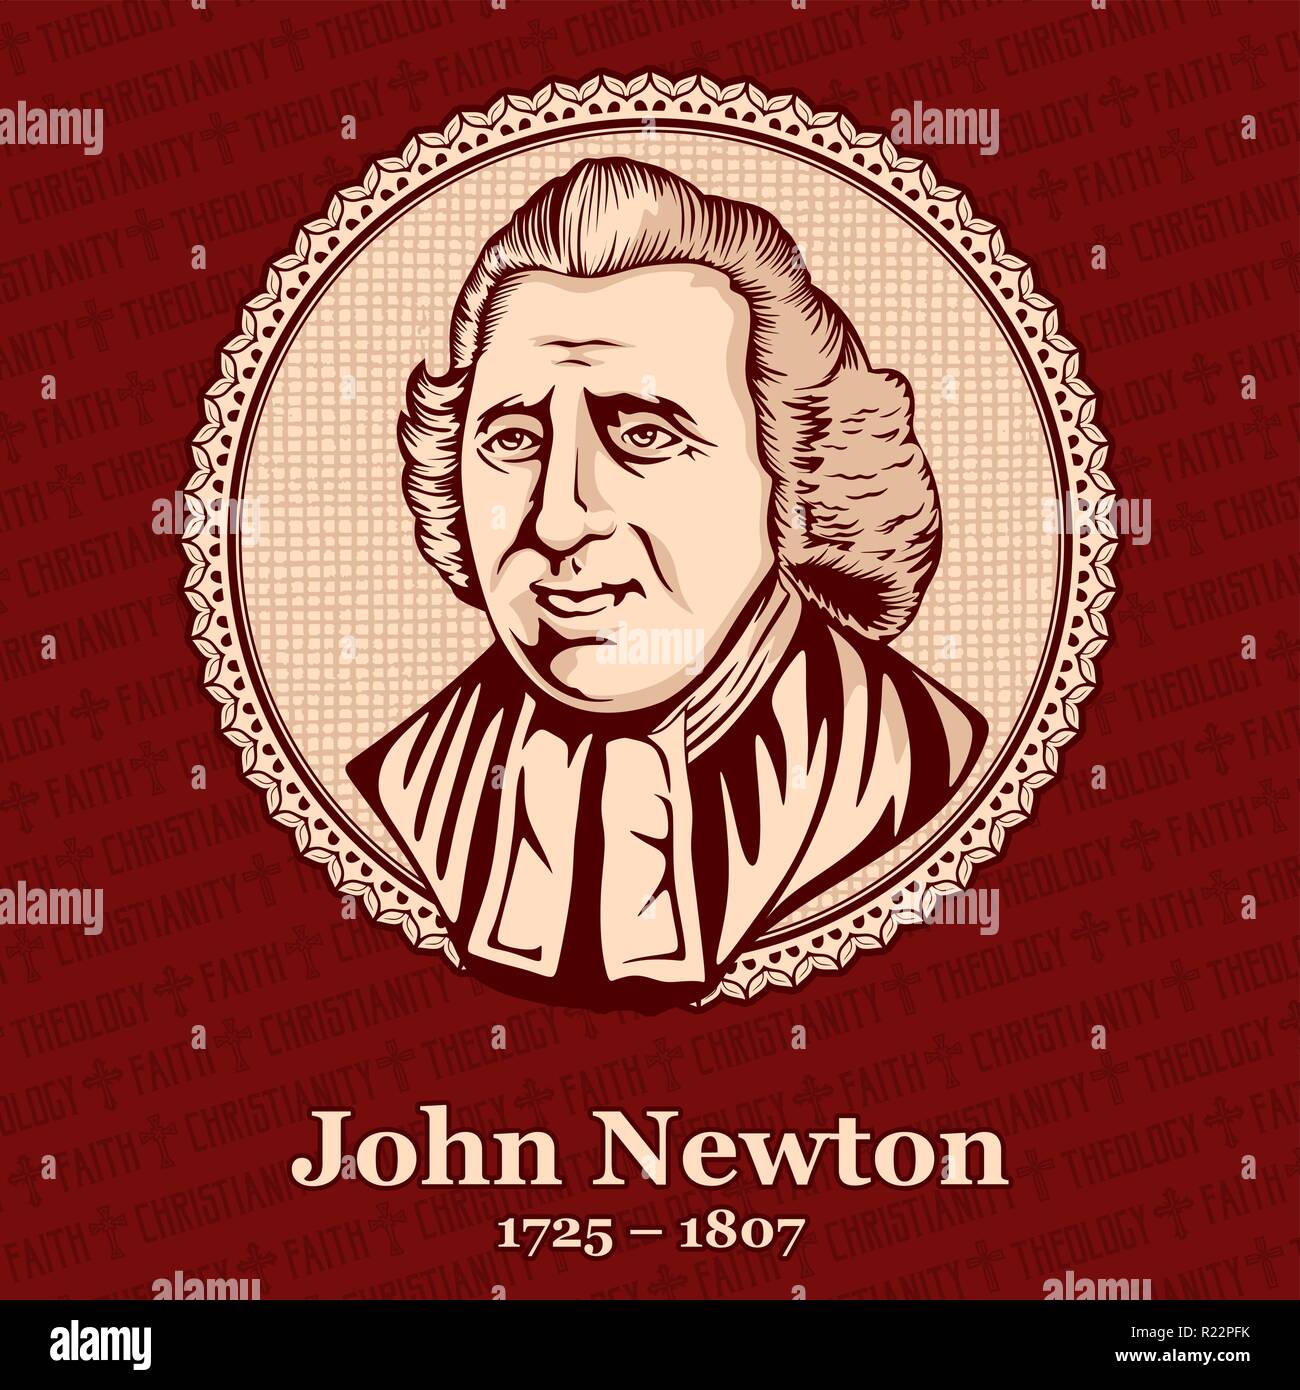 John Newton (1725 – 1807) was an English Anglican clergyman who served as a sailor in the Royal Navy for a period, and later as the captain of slave s Stock Vector